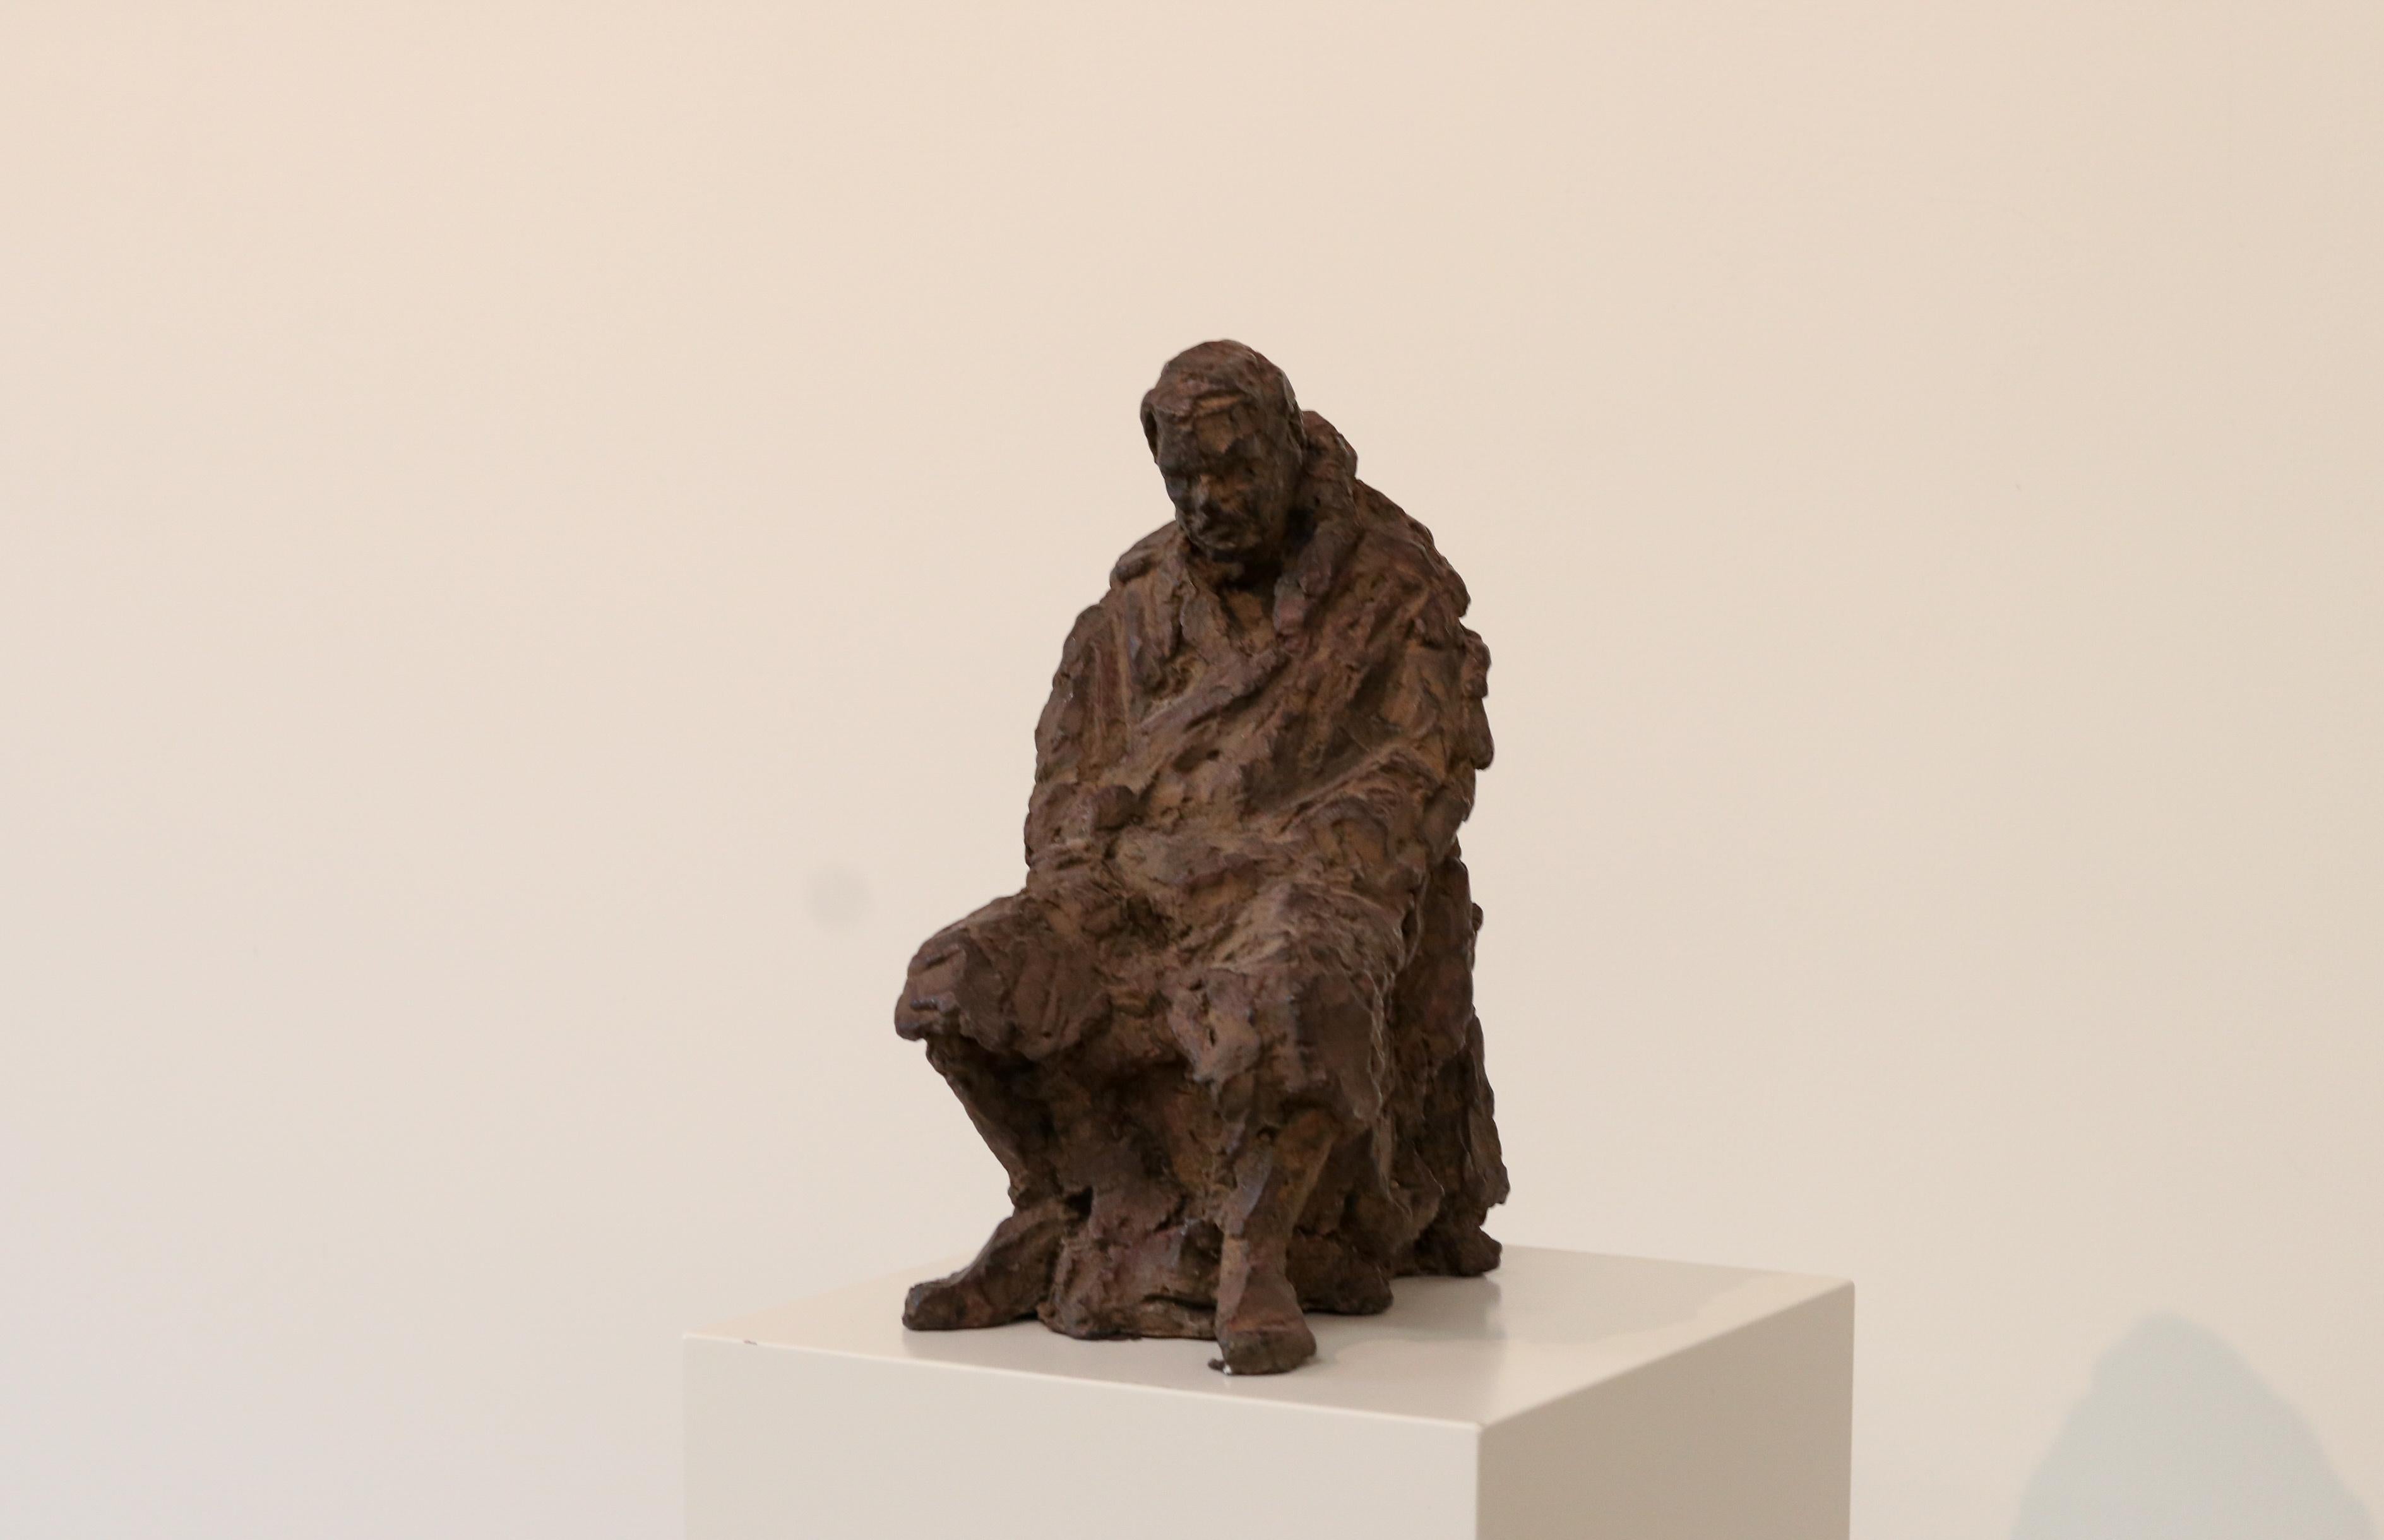 Retirement - 21st Century Contemporary Bronze Sculpture of a sitting old Man  - Gold Figurative Sculpture by Peter Adams